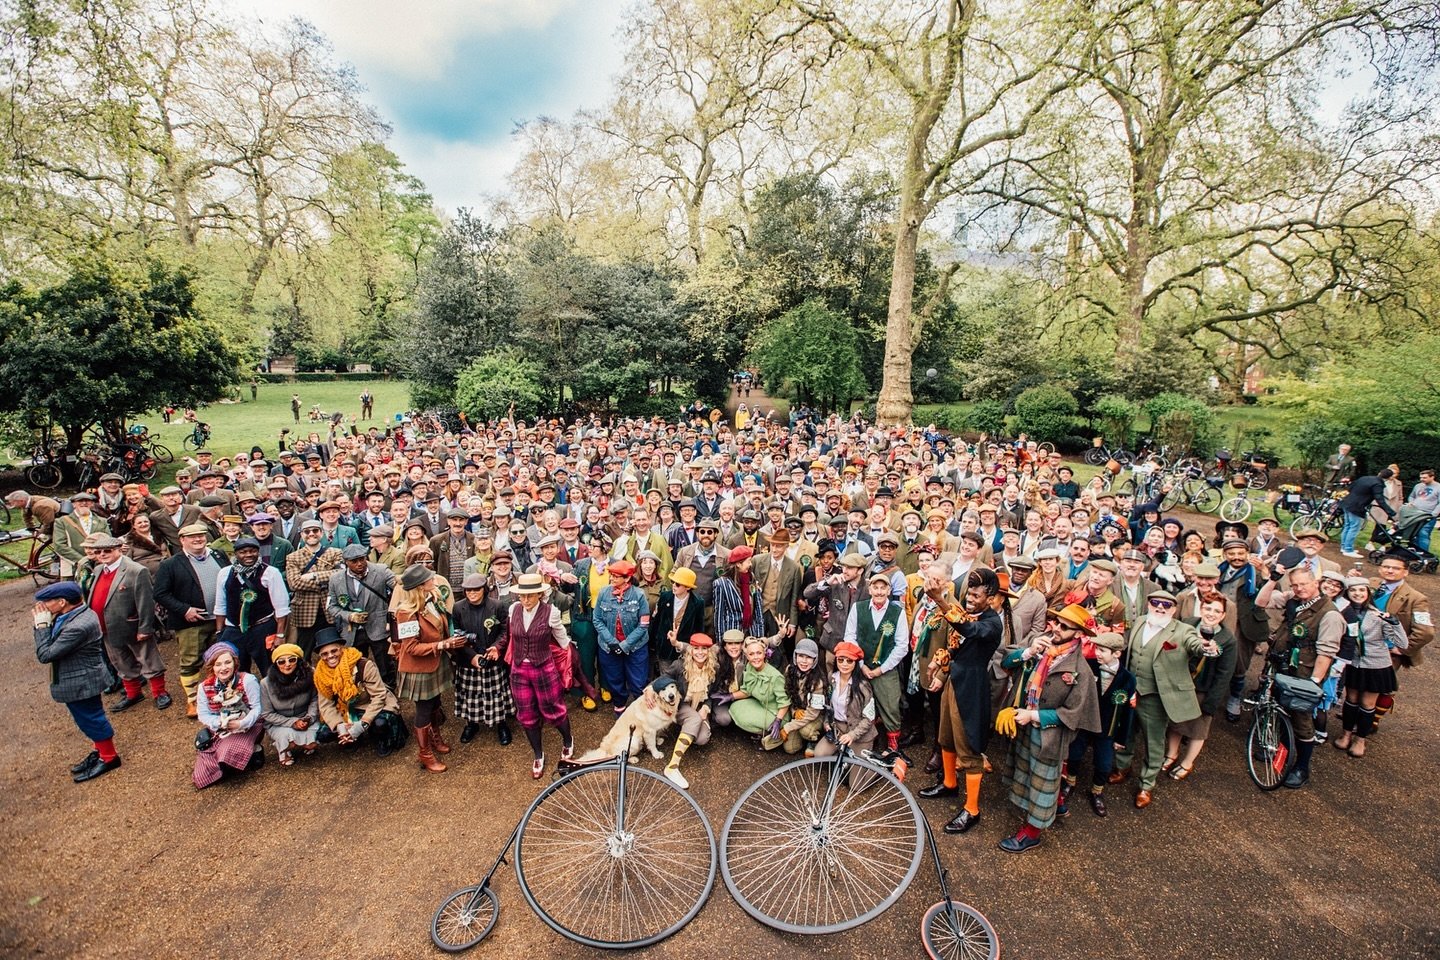 Thank you to all who joined us for yesterday&rsquo;s Tweed Run. A marvellous time had by all. See you next year 🚲